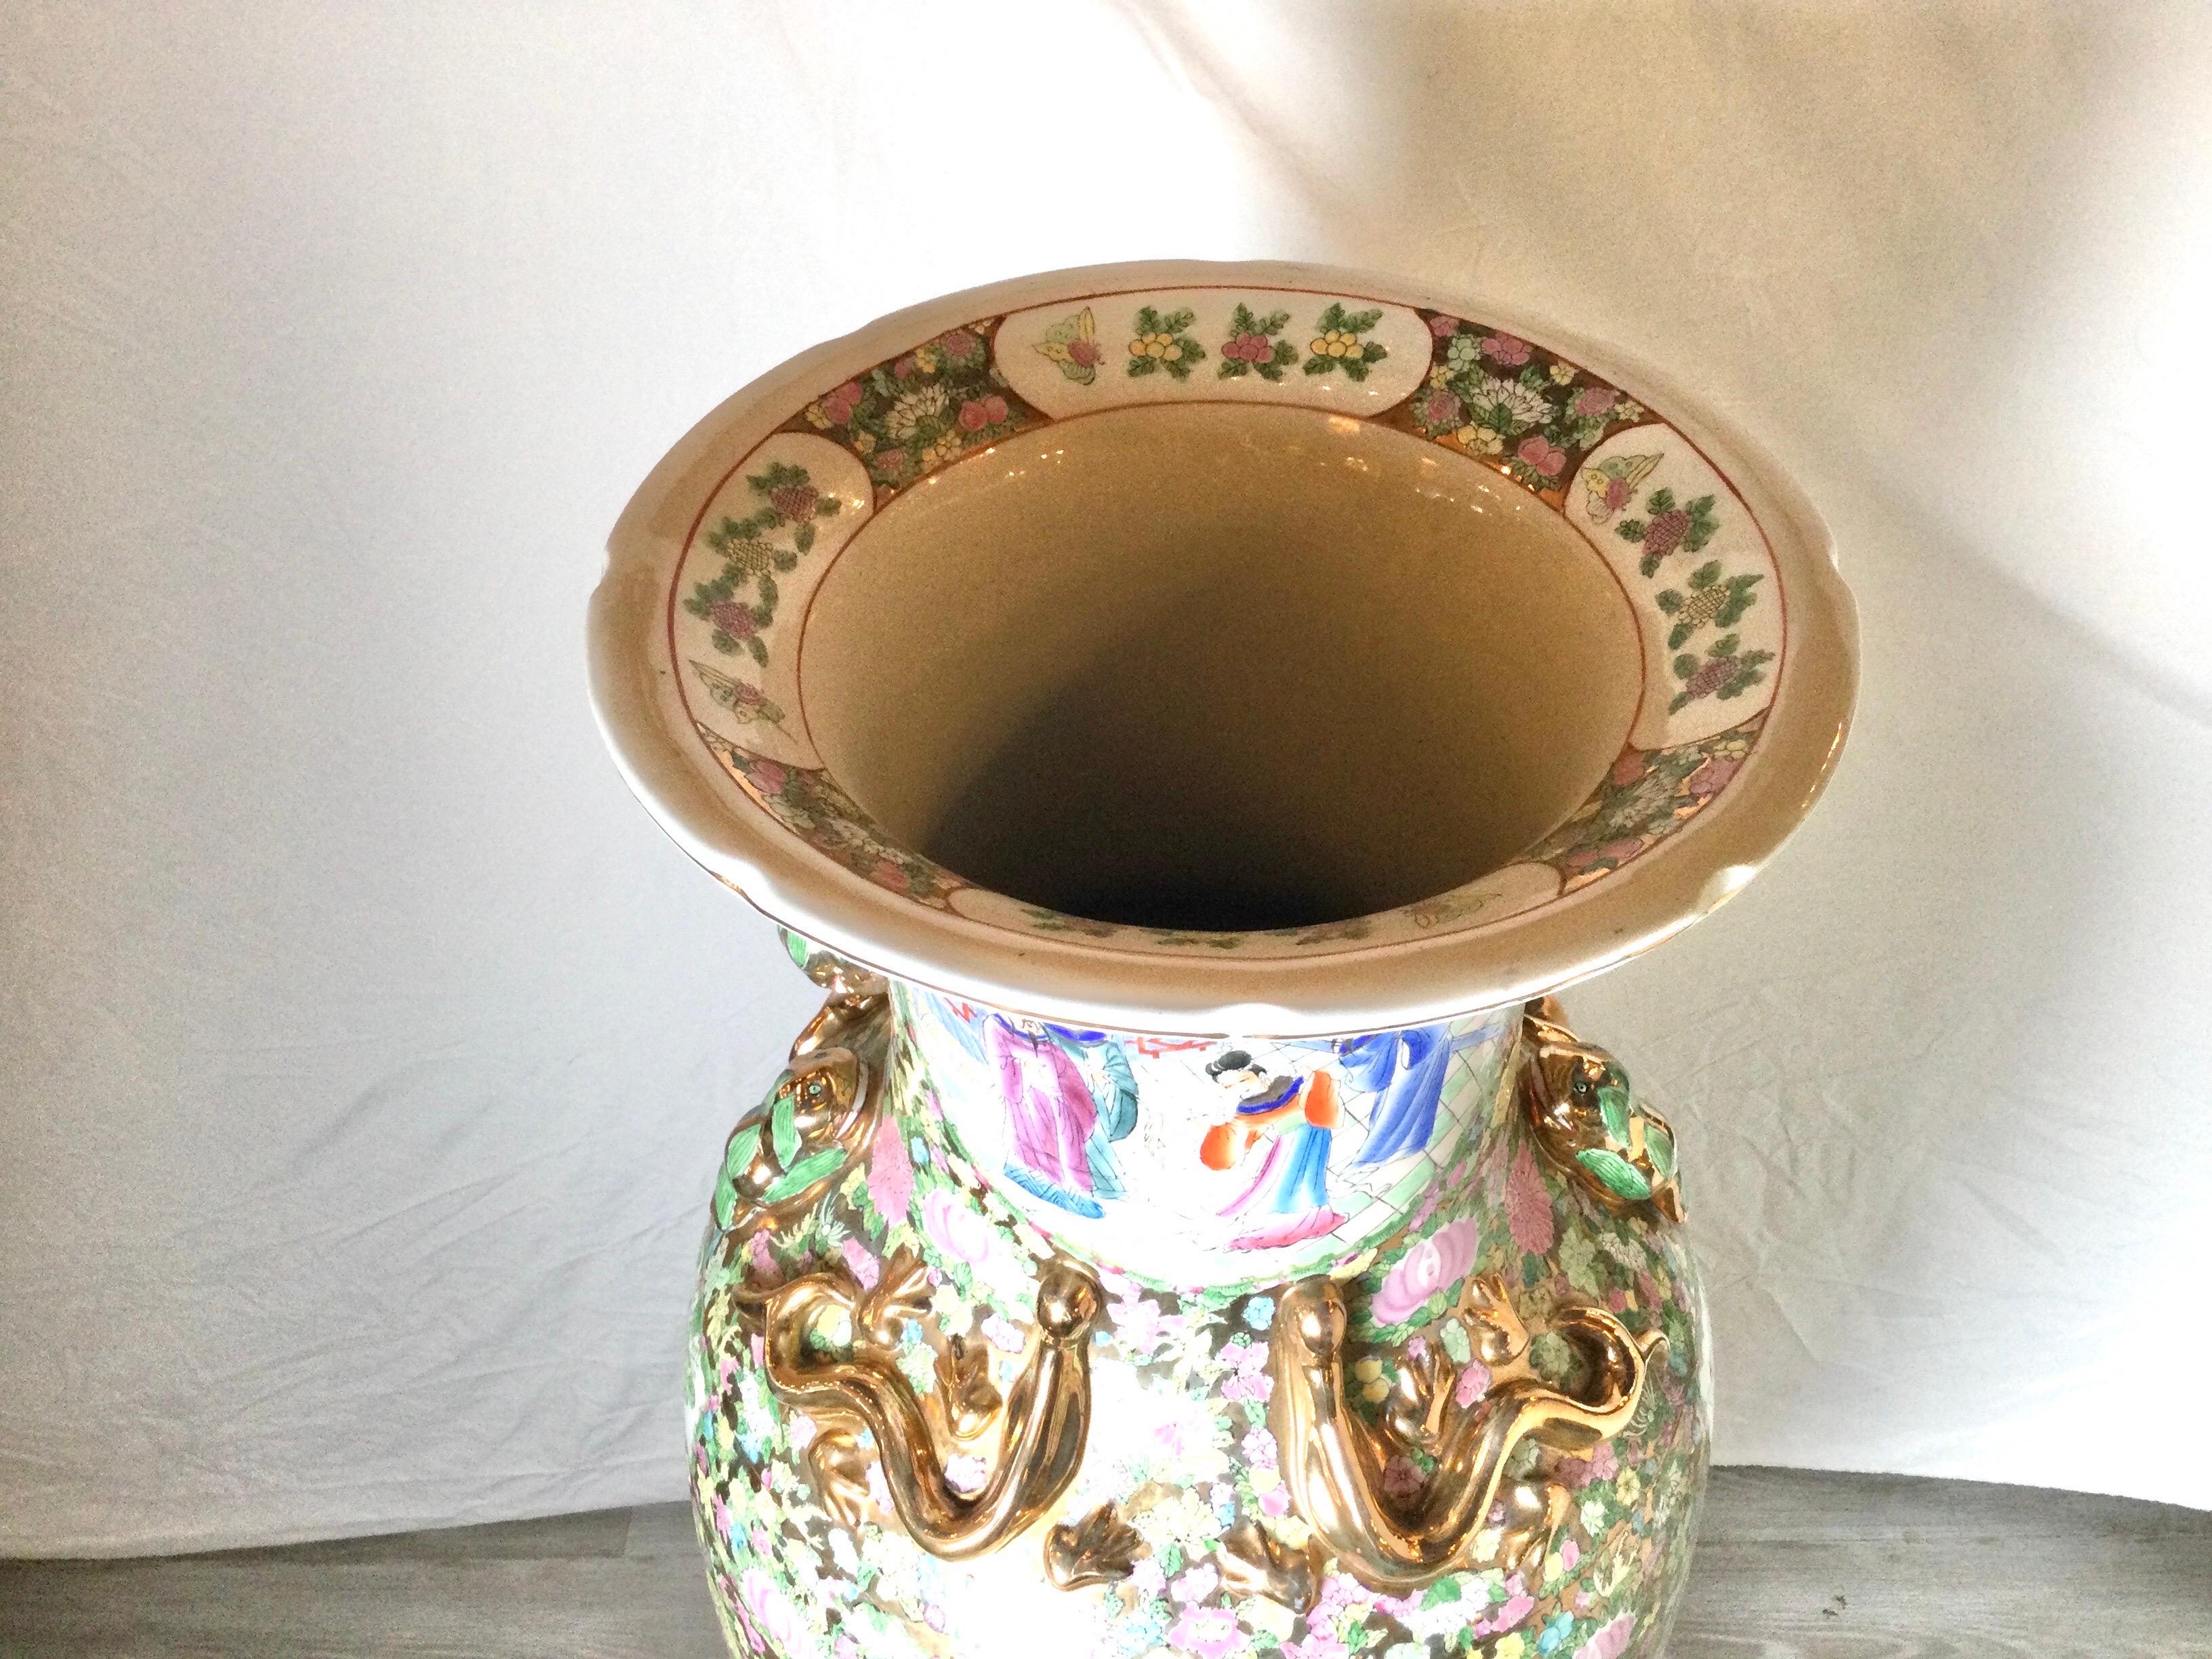 A monumental hand painted and gilt Chinese porcelain palace vase on wood stand. The white porcelain with large cartouches of well dressed noblemen surrounded by vibrant floral with gilt accents. The vase alone is 42.5 inches tall, 19 inches diameter